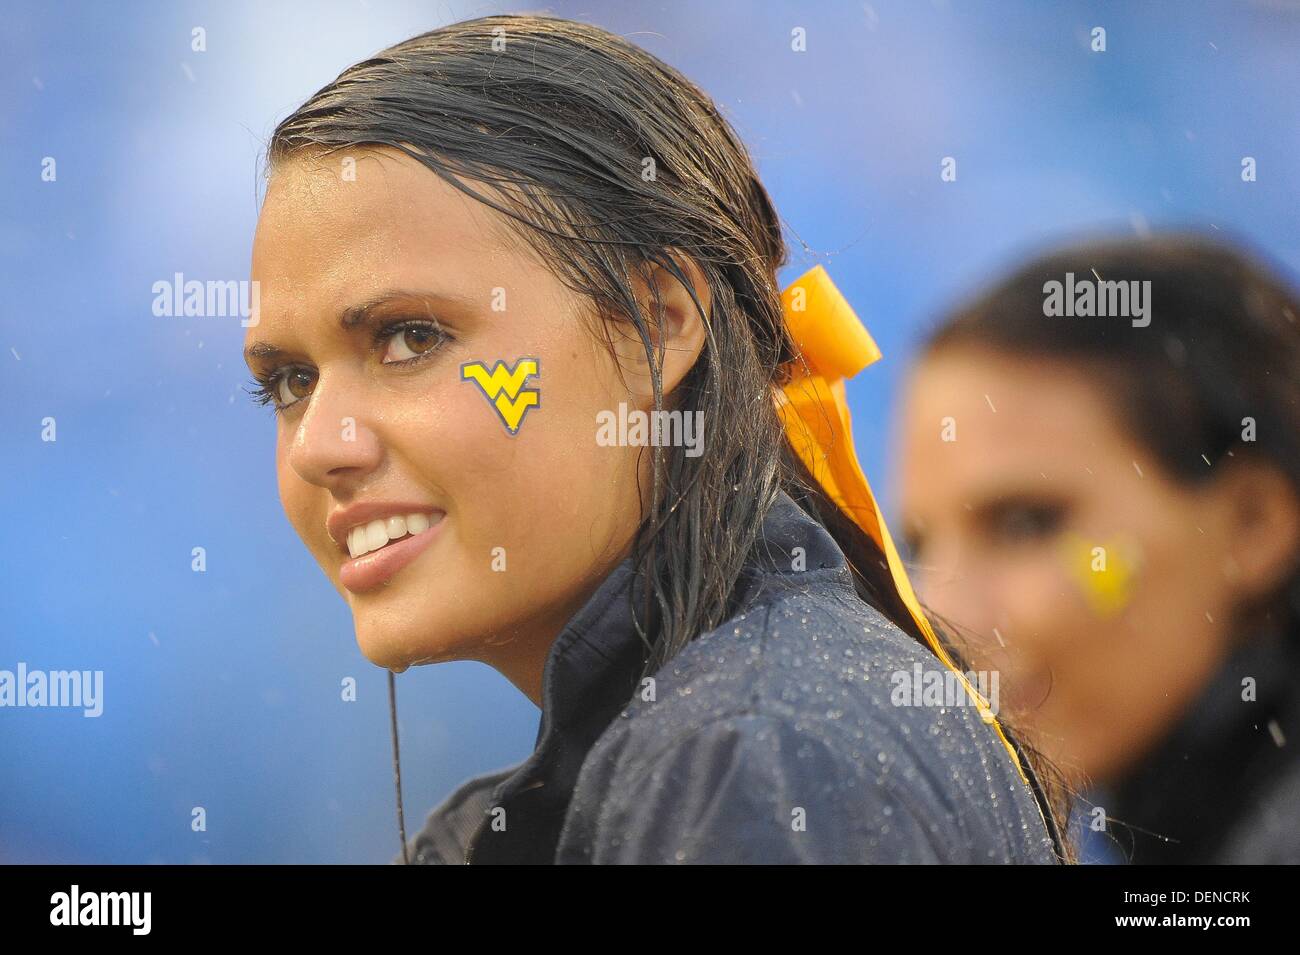 Baltimore, MD, USA. 21st Sep, 2013. A Mountaineer cheerleader watches her team as she gets soaked from the heavy rain during a match up between the Maryland Terrapins and the West Virginia Mountaineers at M&T Bank Stadium in Baltimore, MD. The Terrapins shut out the Mountaineers 37-0. Credit:  Cal Sport Media/Alamy Live News Stock Photo